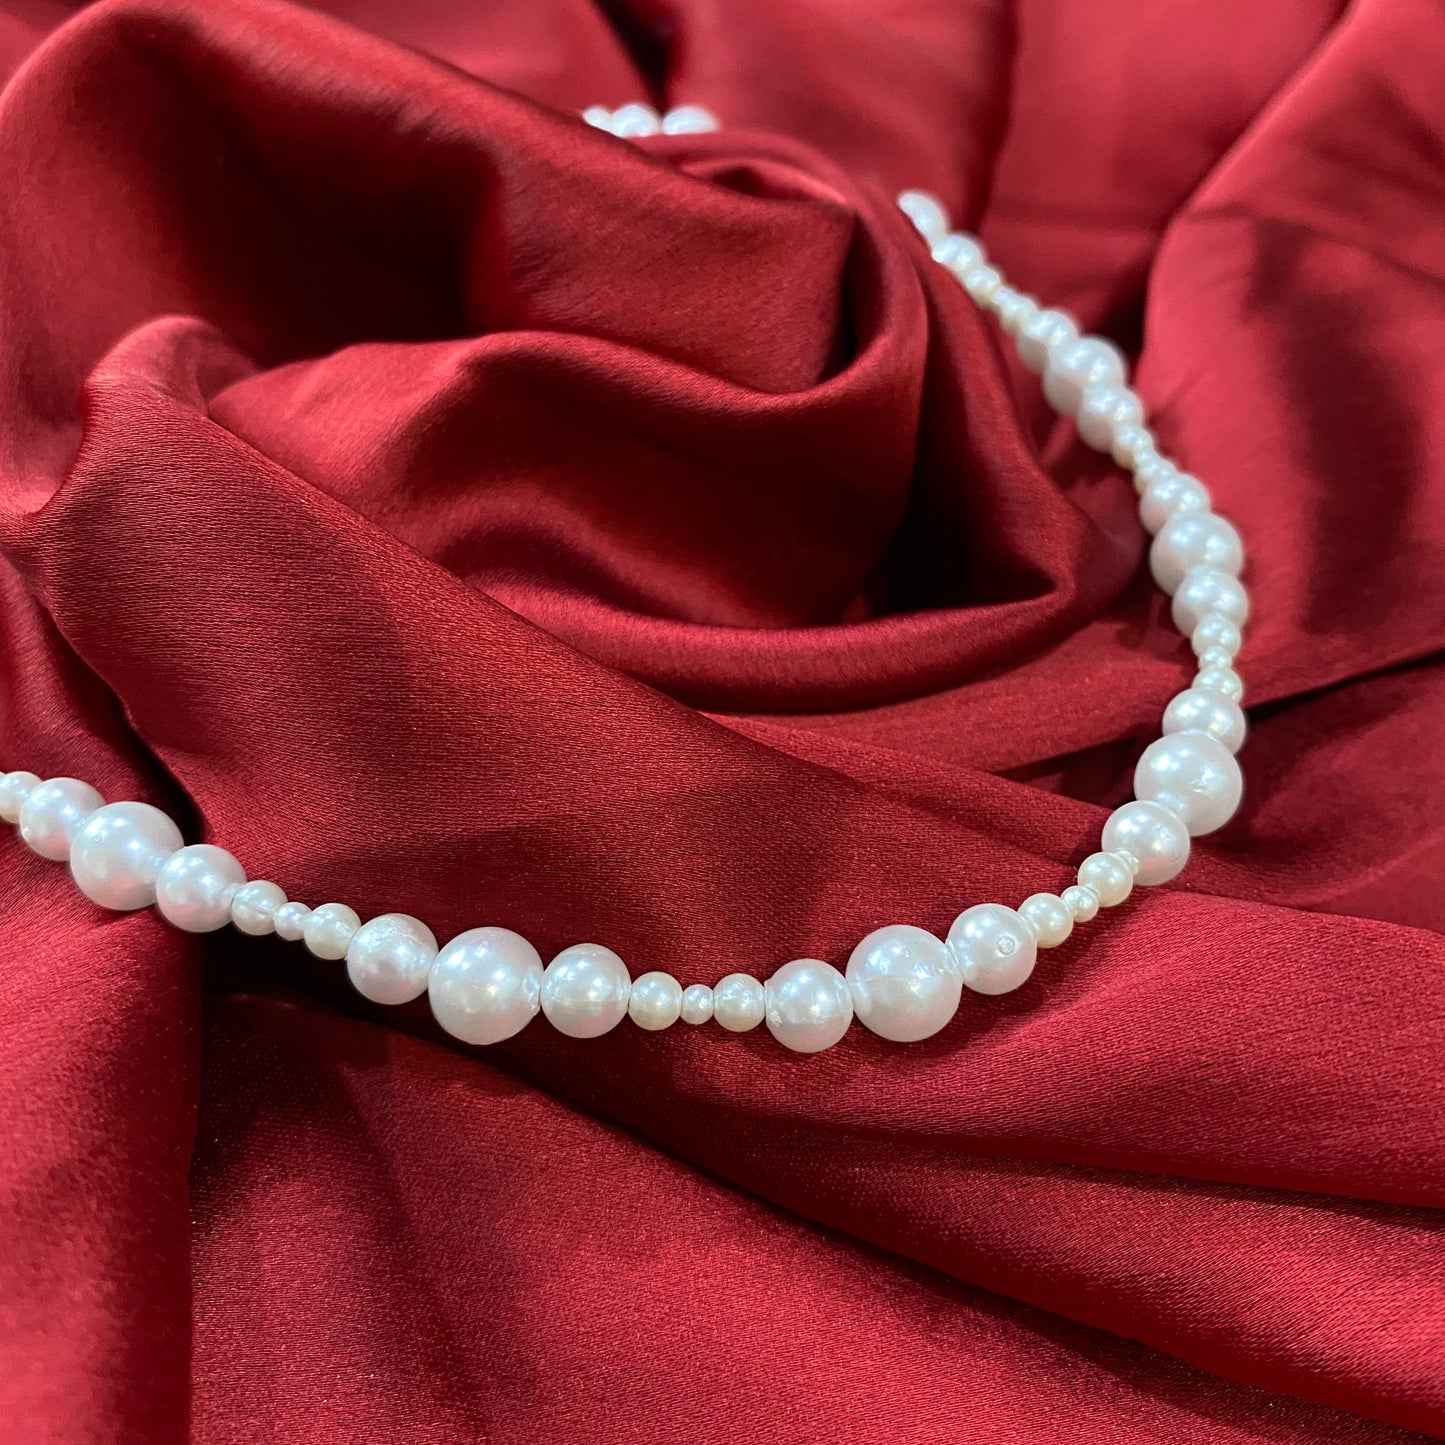 BOUNCING PEARL NECKLACE